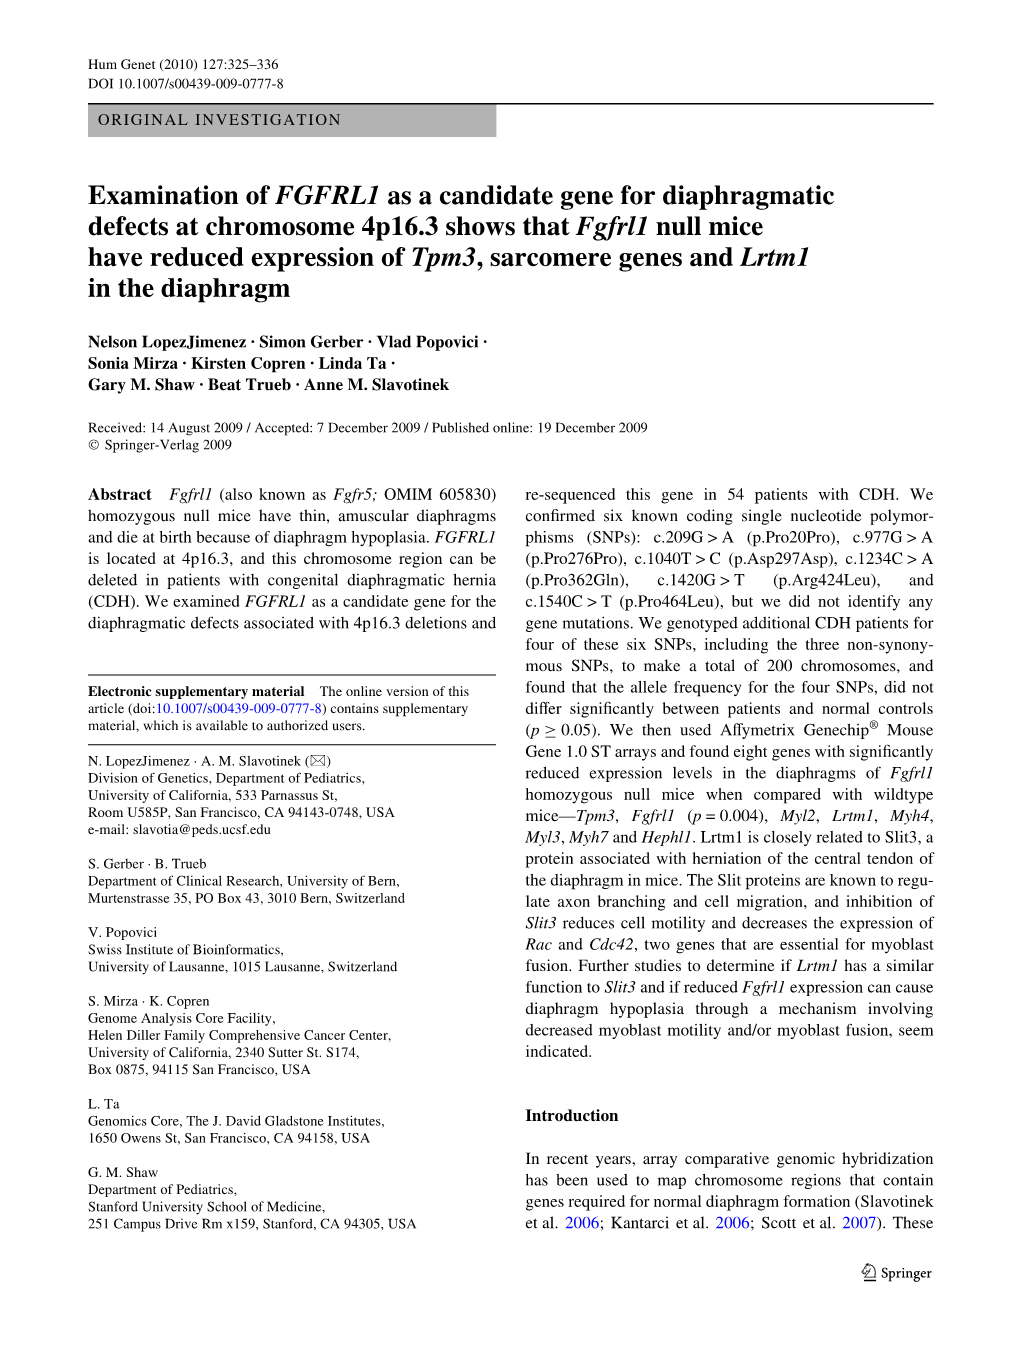 Examination of FGFRL1 As a Candidate Gene for Diaphragmatic